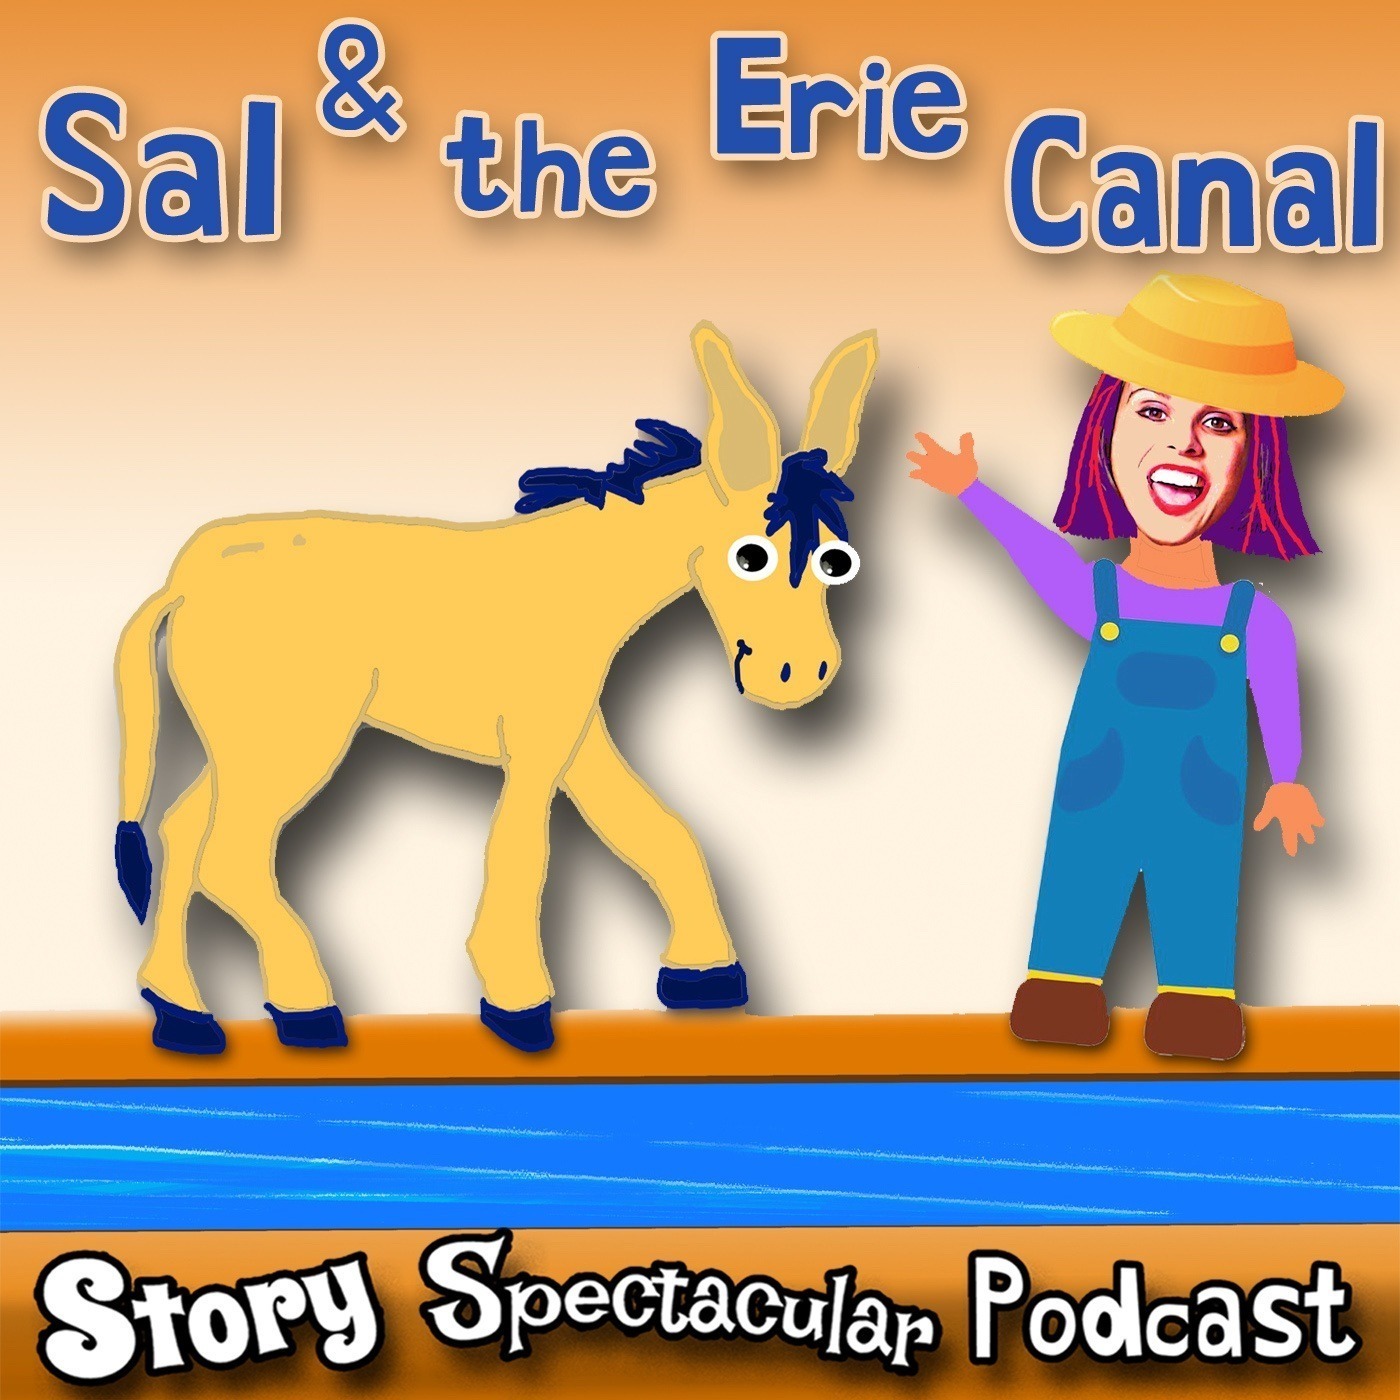 Sal and the Erie Canal